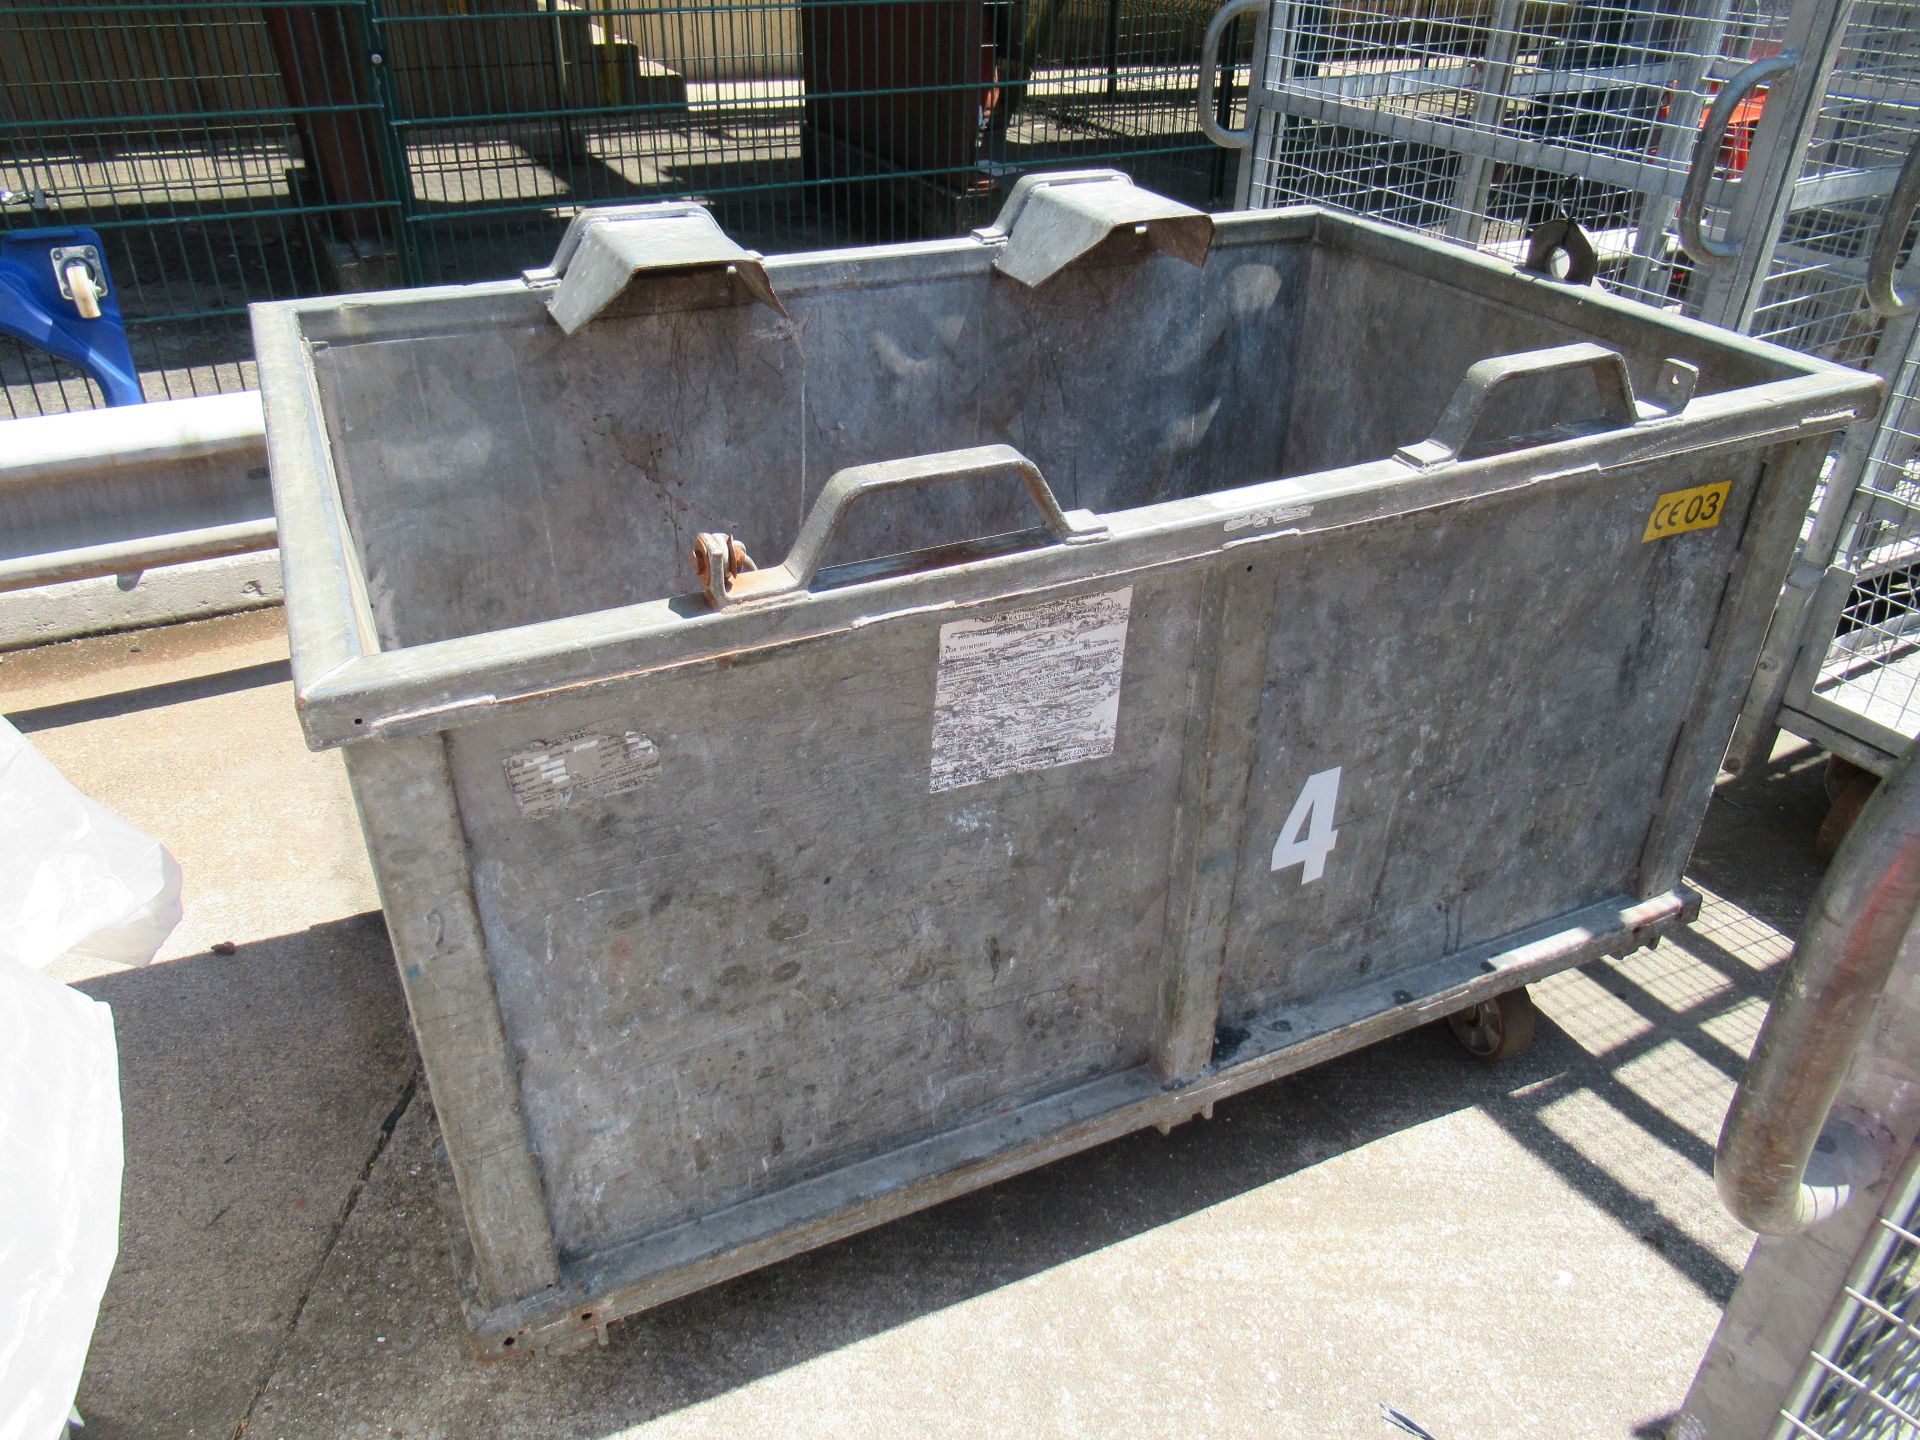 4 Galvanised mobile four wheel waste bins, 1600 x 950 x 750mm high with fold down draw bar